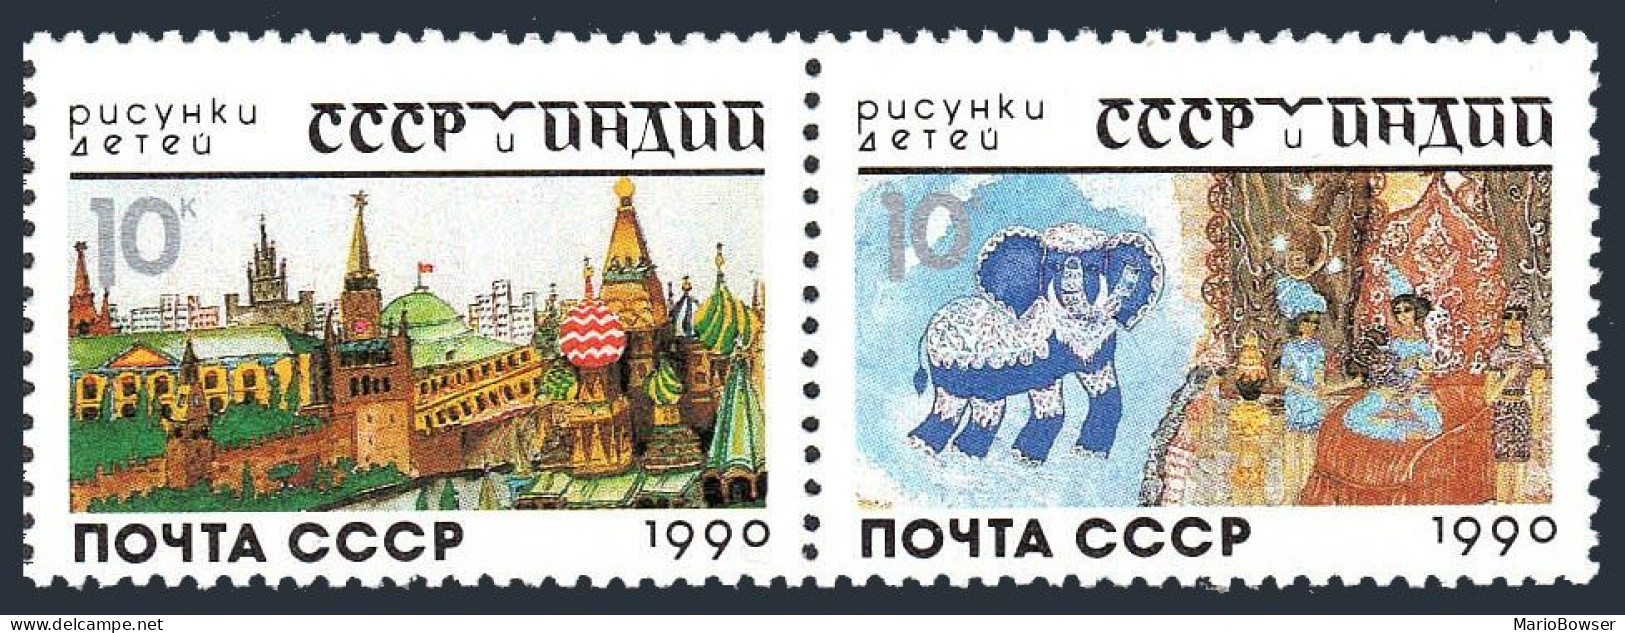 Russia 5925-5926a Pair, MNH. Mi 6121-6122. USSR - India, 1990. Child Drawings. - Nuevos